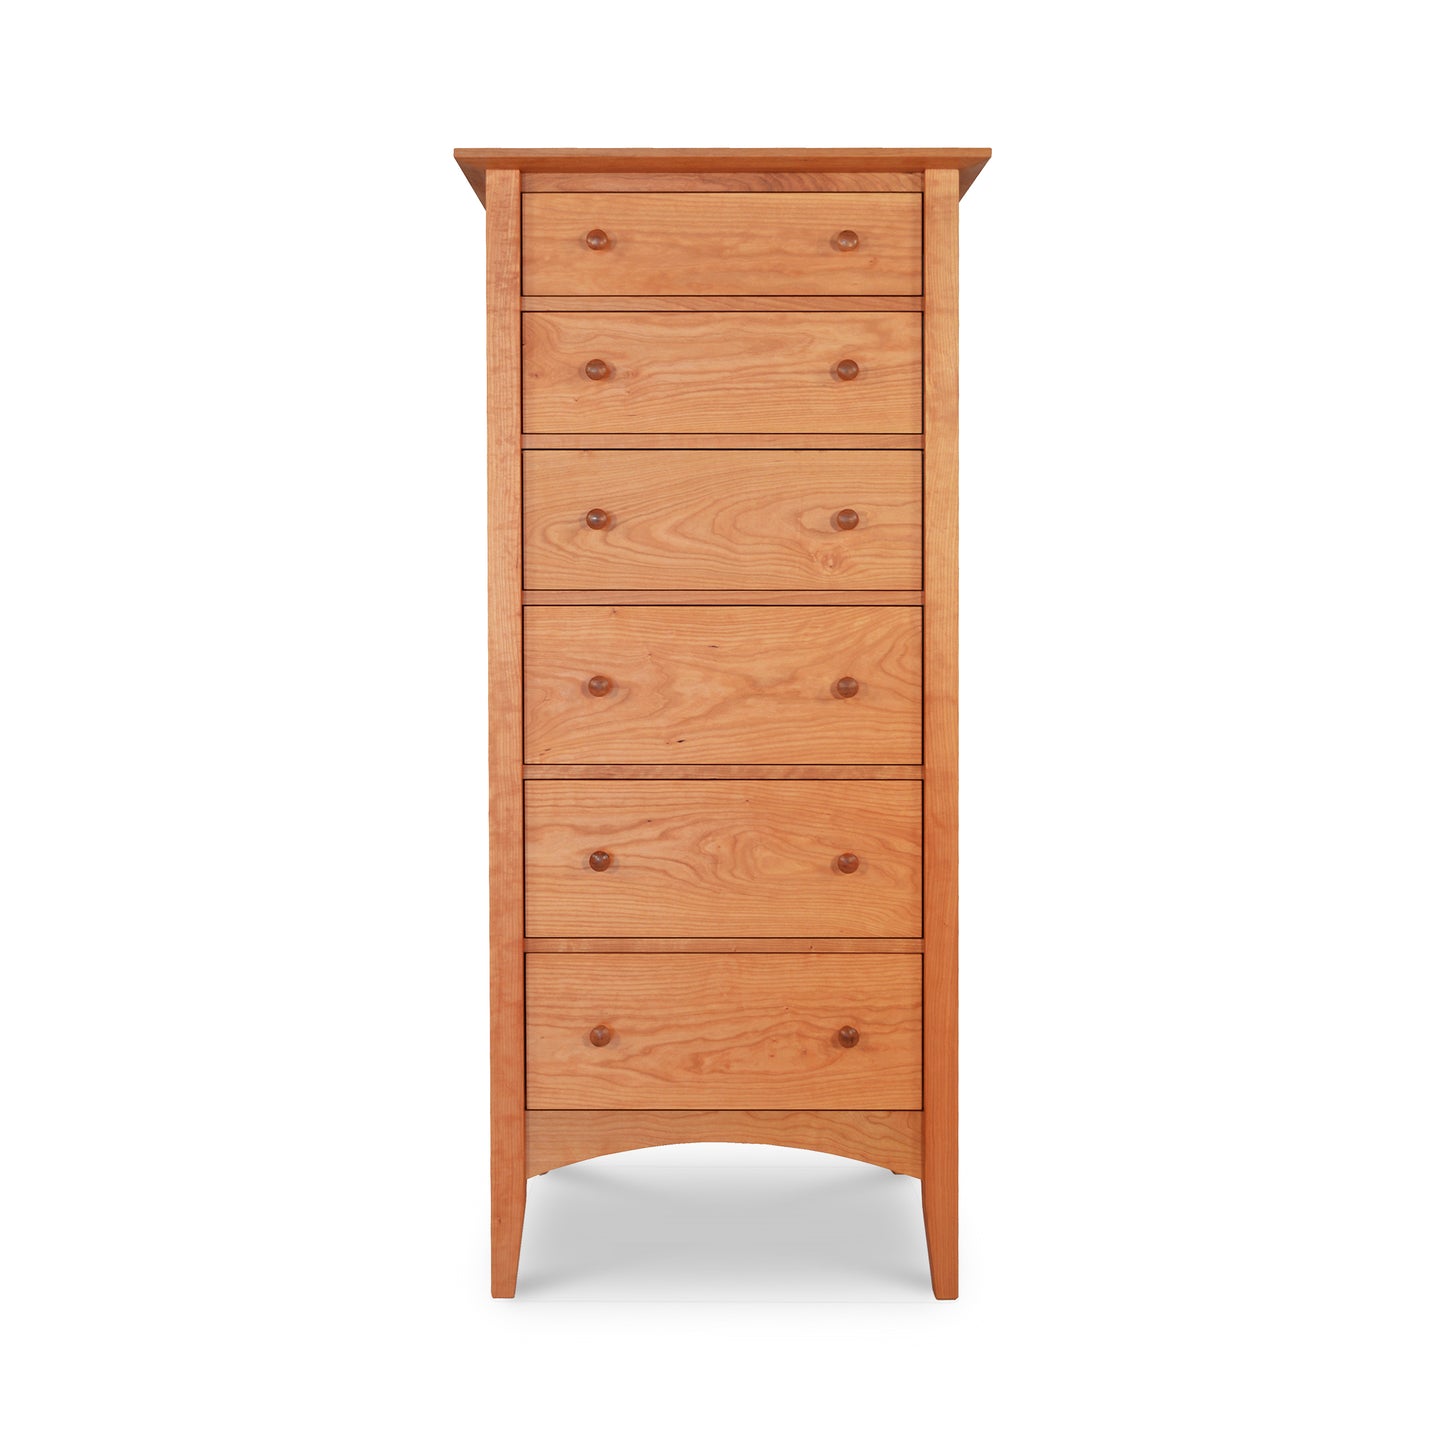 A sustainably harvested American Shaker 6-Drawer Lingerie Chest from Maple Corner Woodworks on a white background.